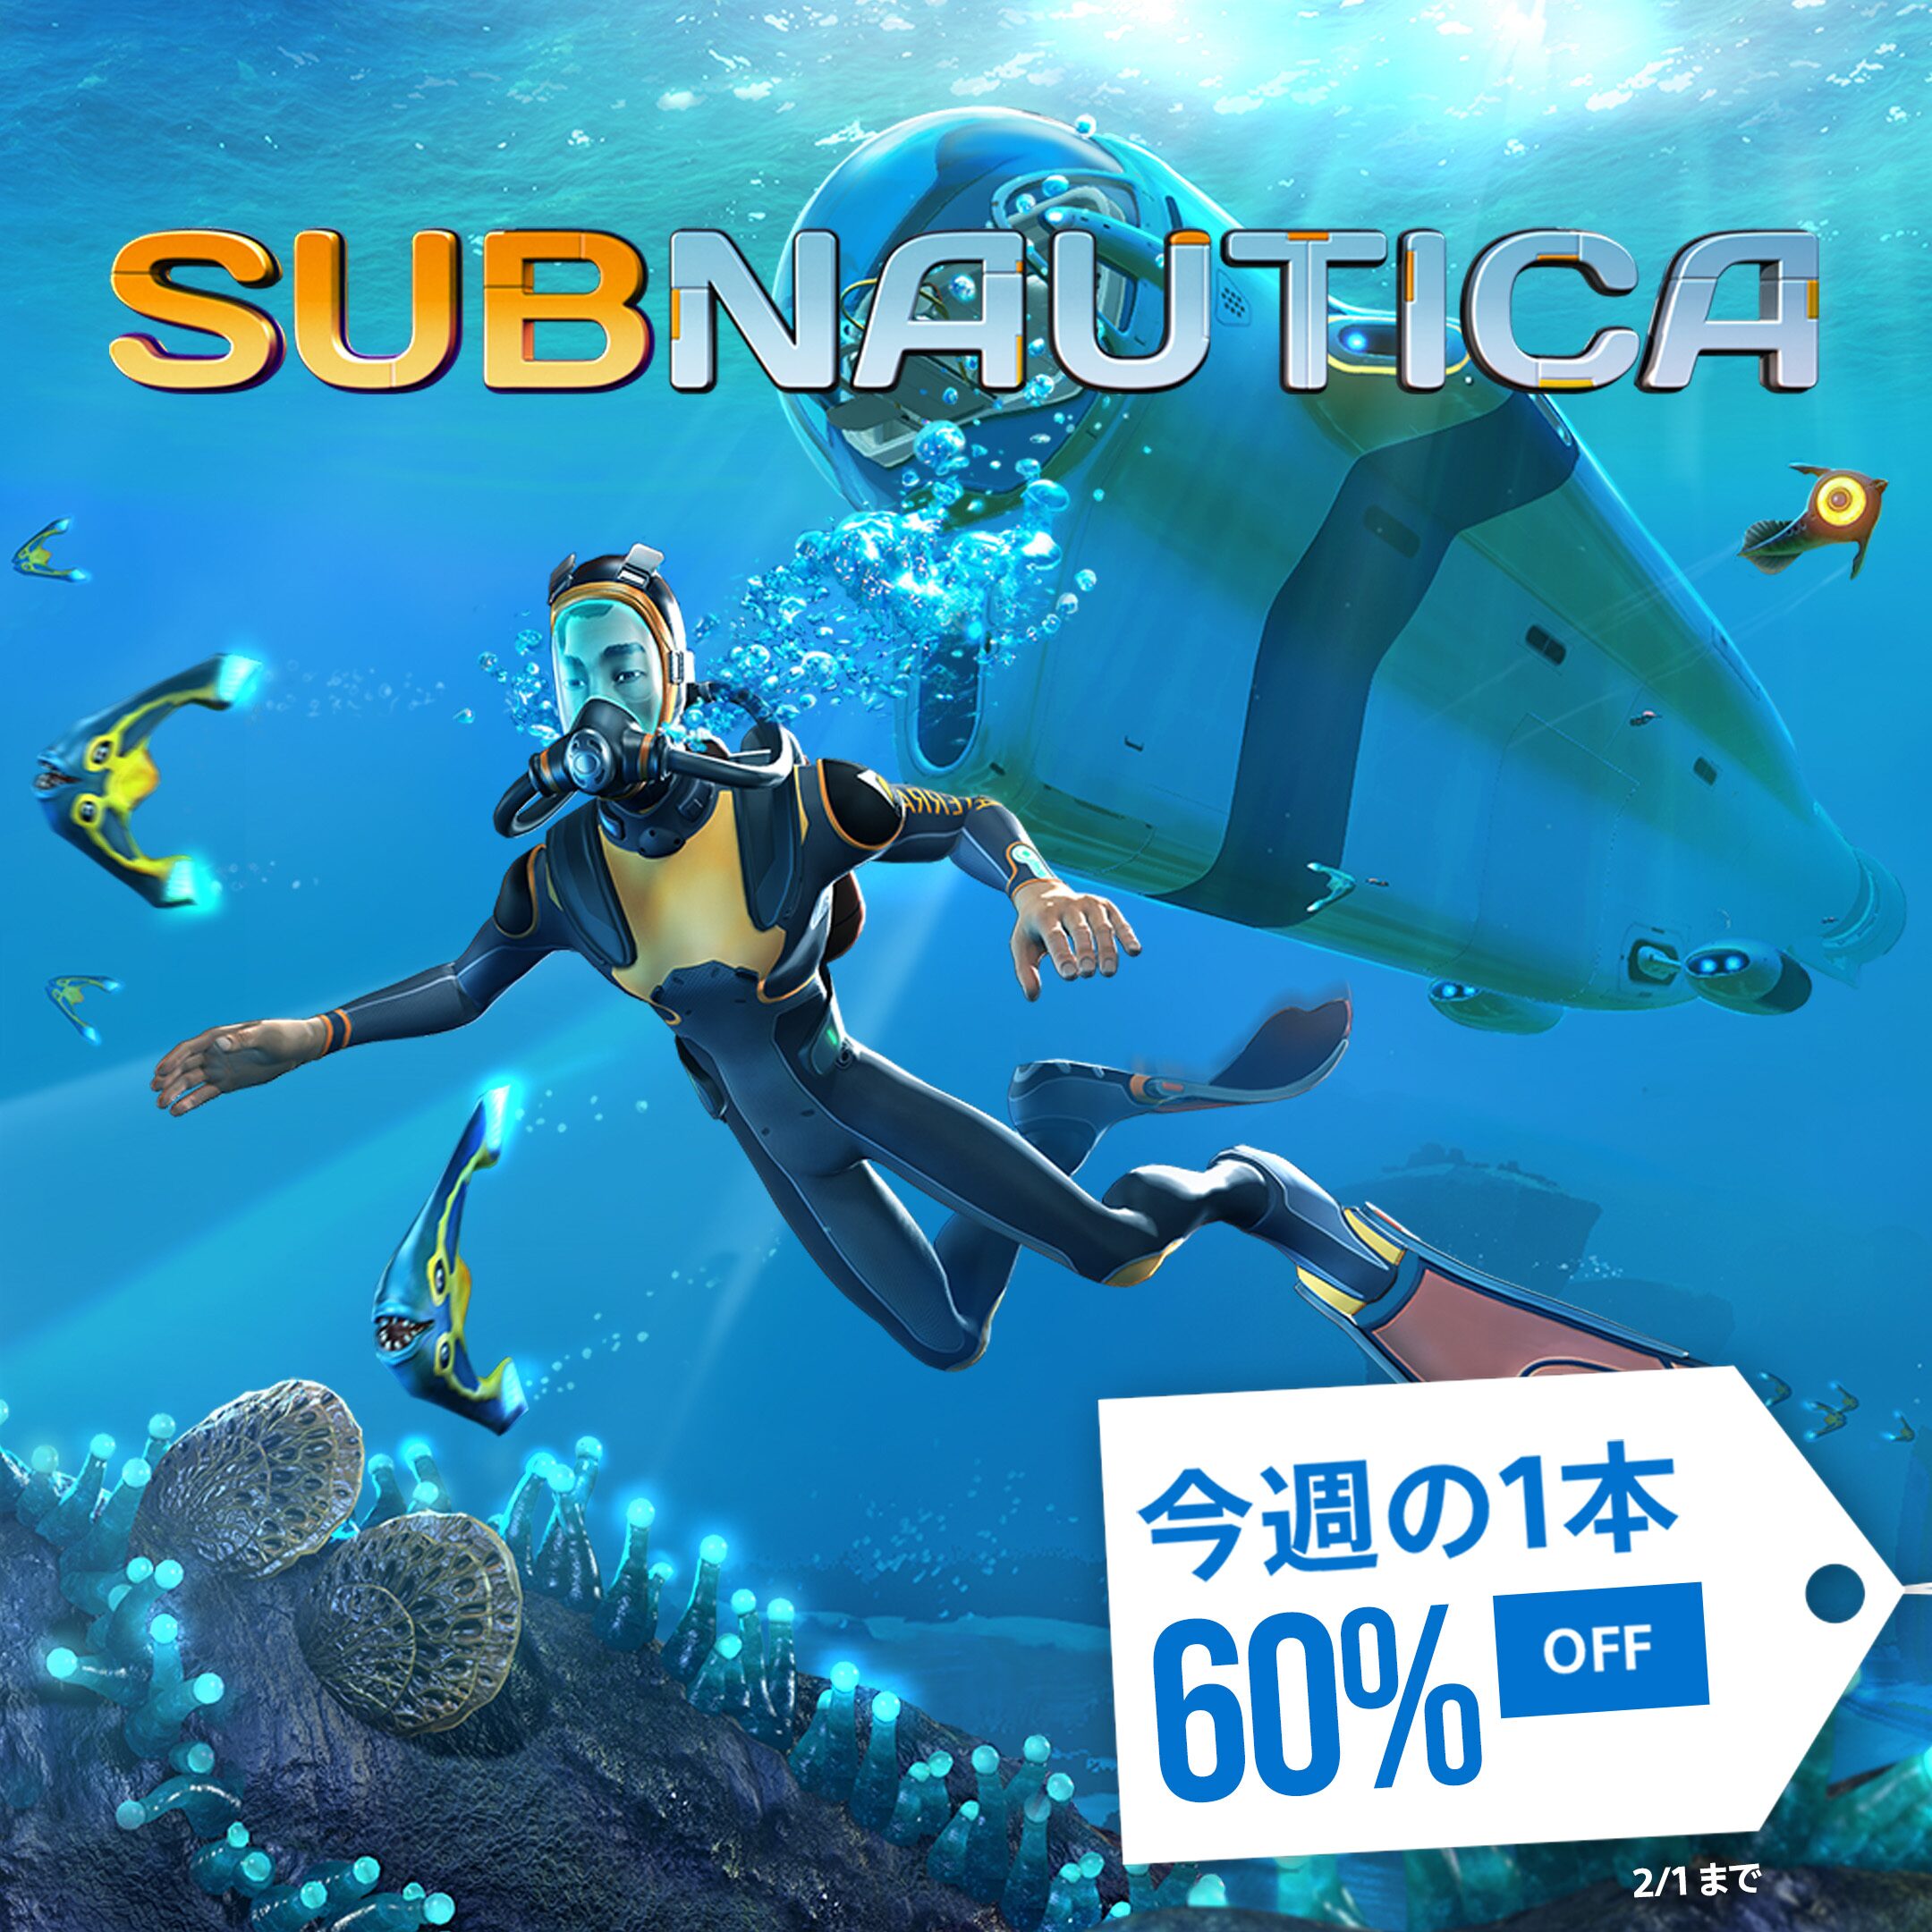 [PROMO] Deal of the Week 1/25 - Subnautica - TD